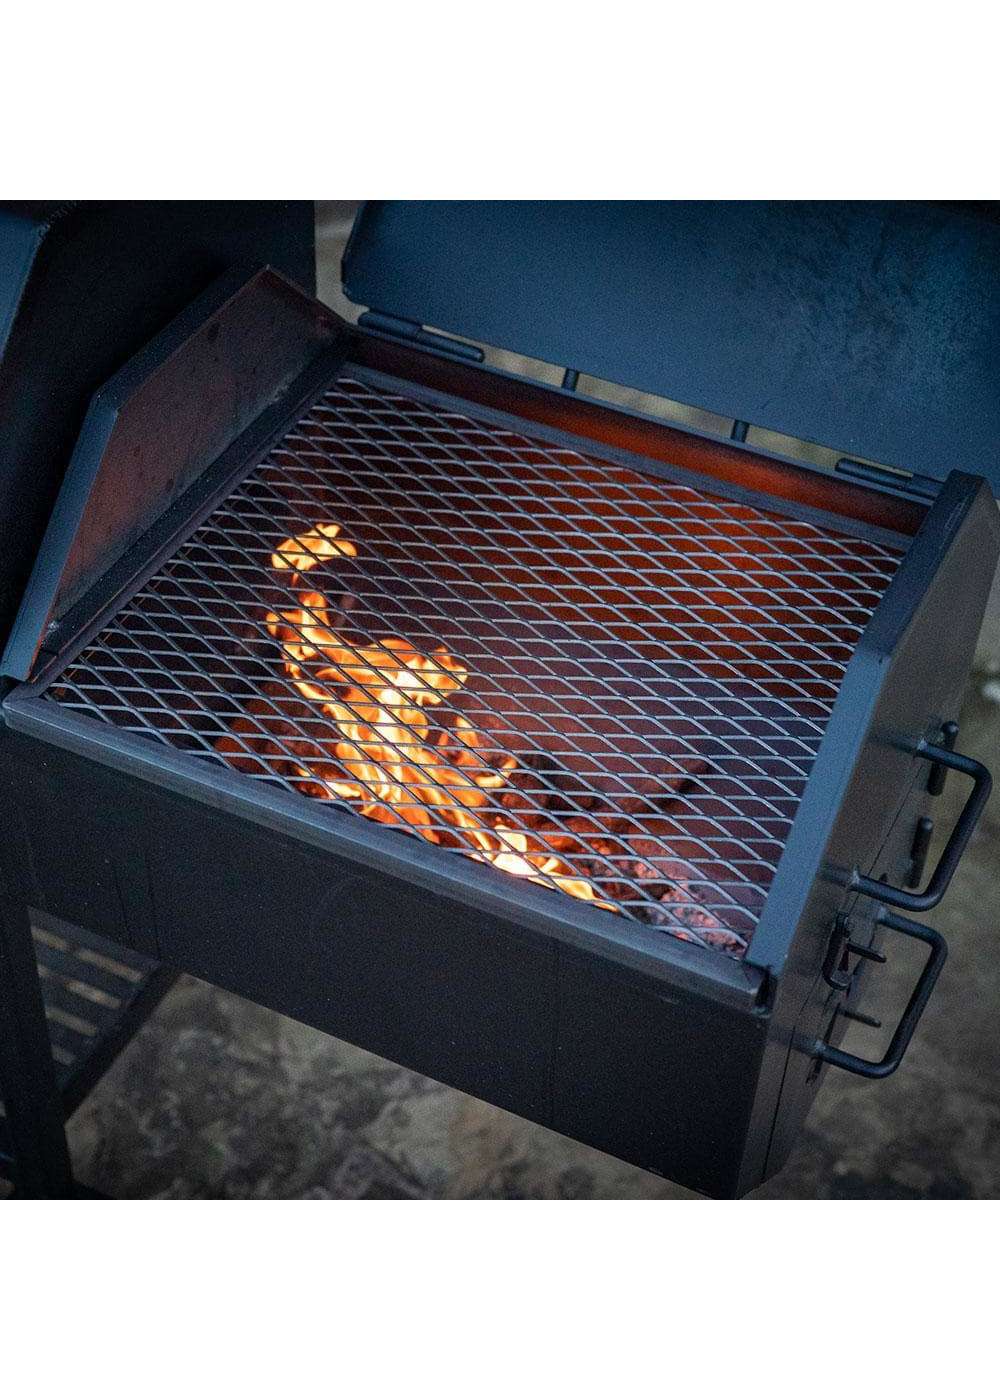 All Seasons Feeders Charcoal BBQ Pit with Firebox; image 4 of 7